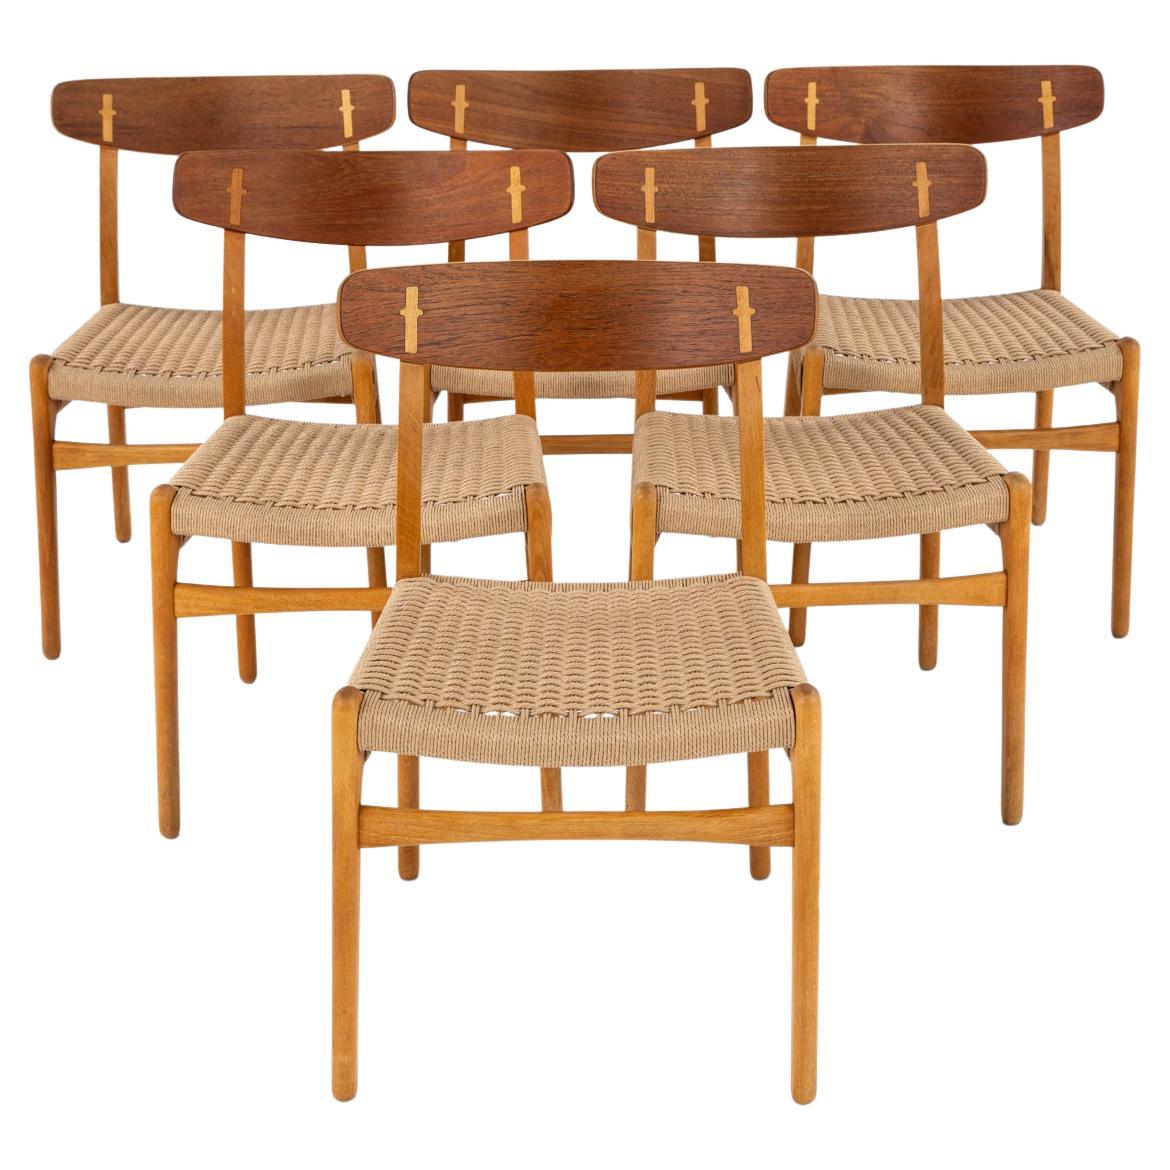 Set of 6 dining chairs by Hans J. Wegner